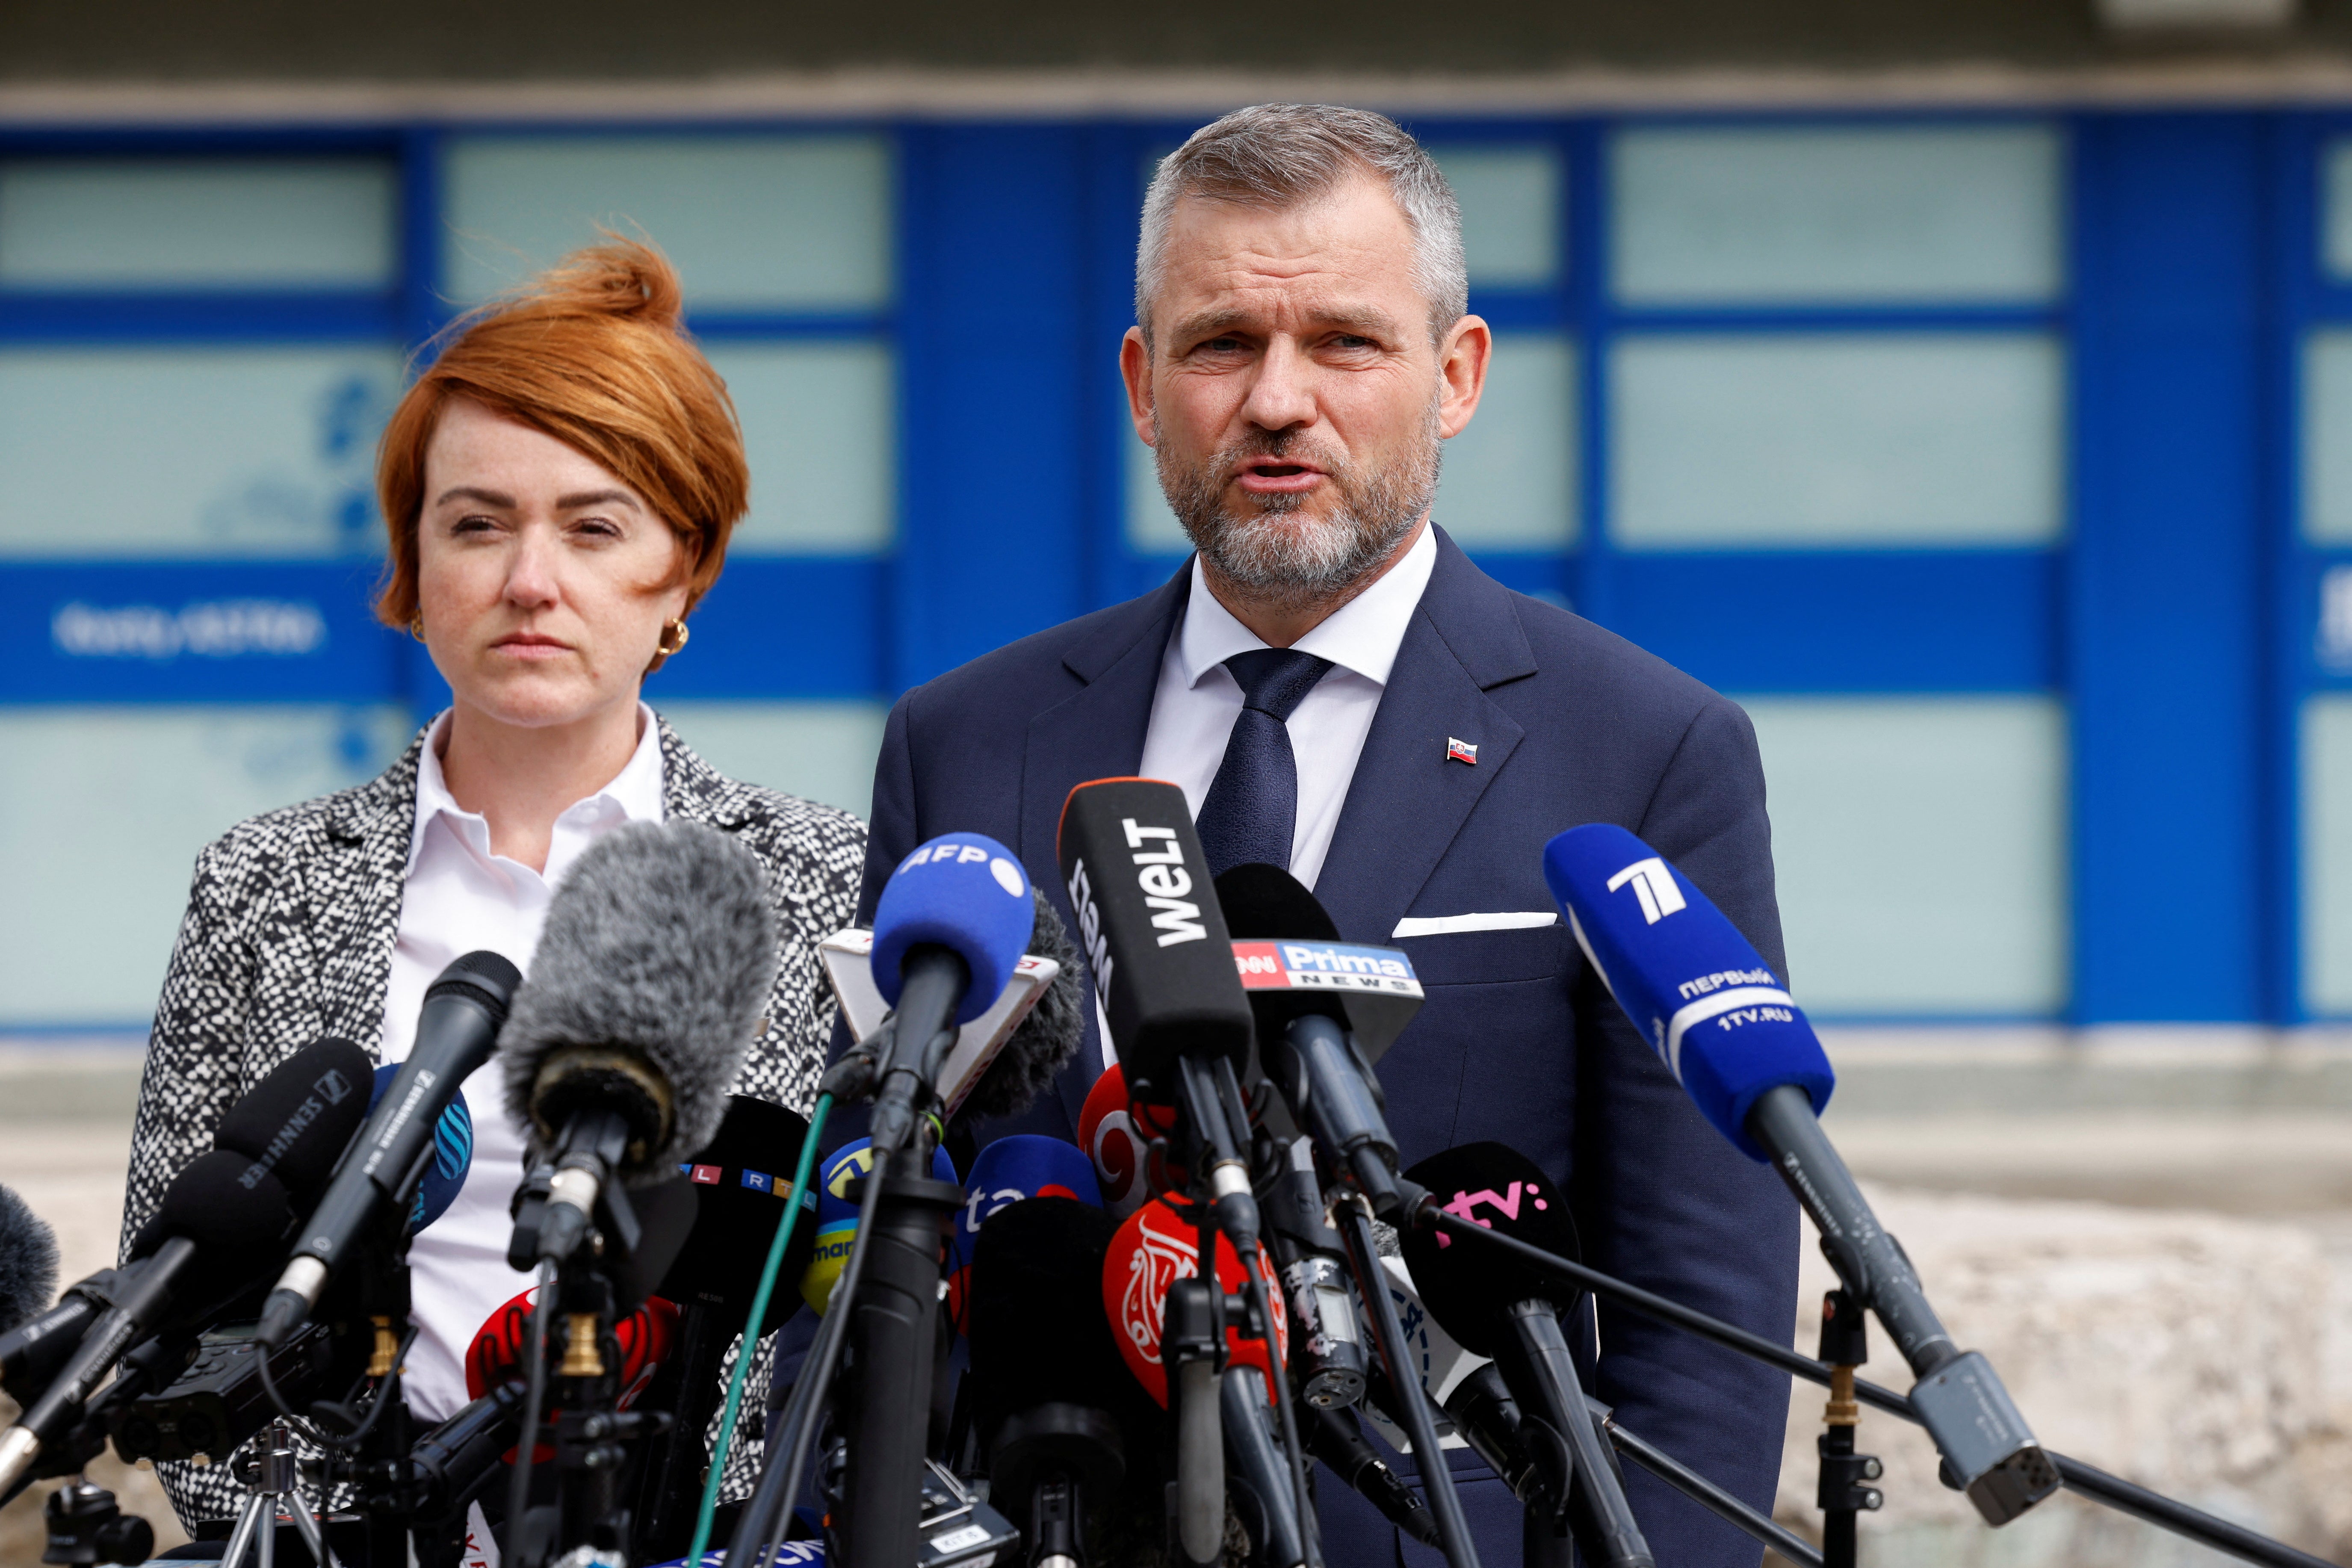 Slovakian president Peter Pellegrini said if the bullets struck just a few millimetres either side, Mr Fico would have been killed by the lone-wolf gunman